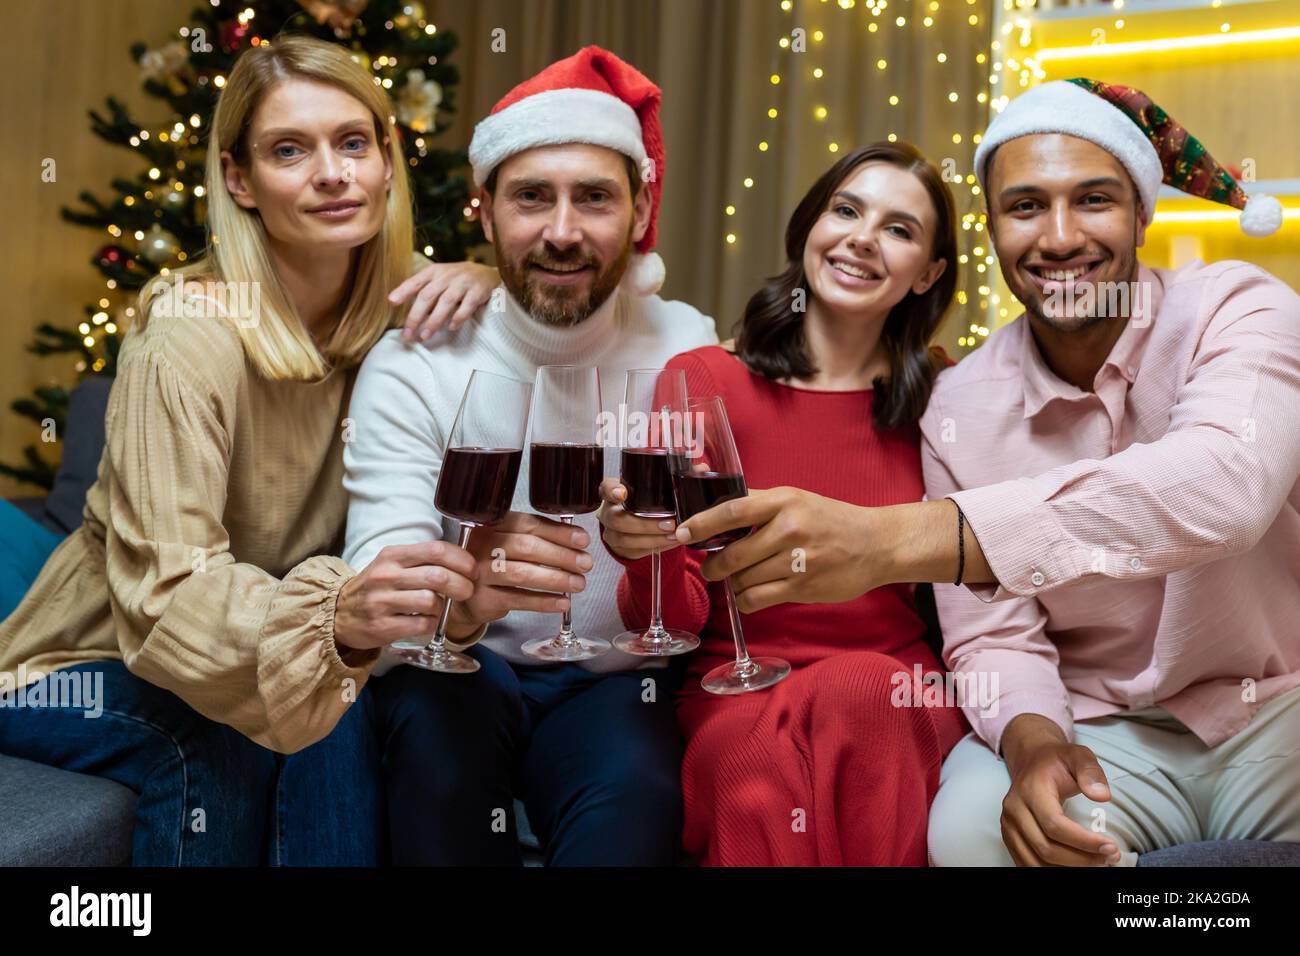 Portrait of a group of diverse guests at home for the new year, friends celebrating Christmas looking at the camera and smiling holding glasses of wine, sitting on the sofa in the living room cinema. Stock Photo